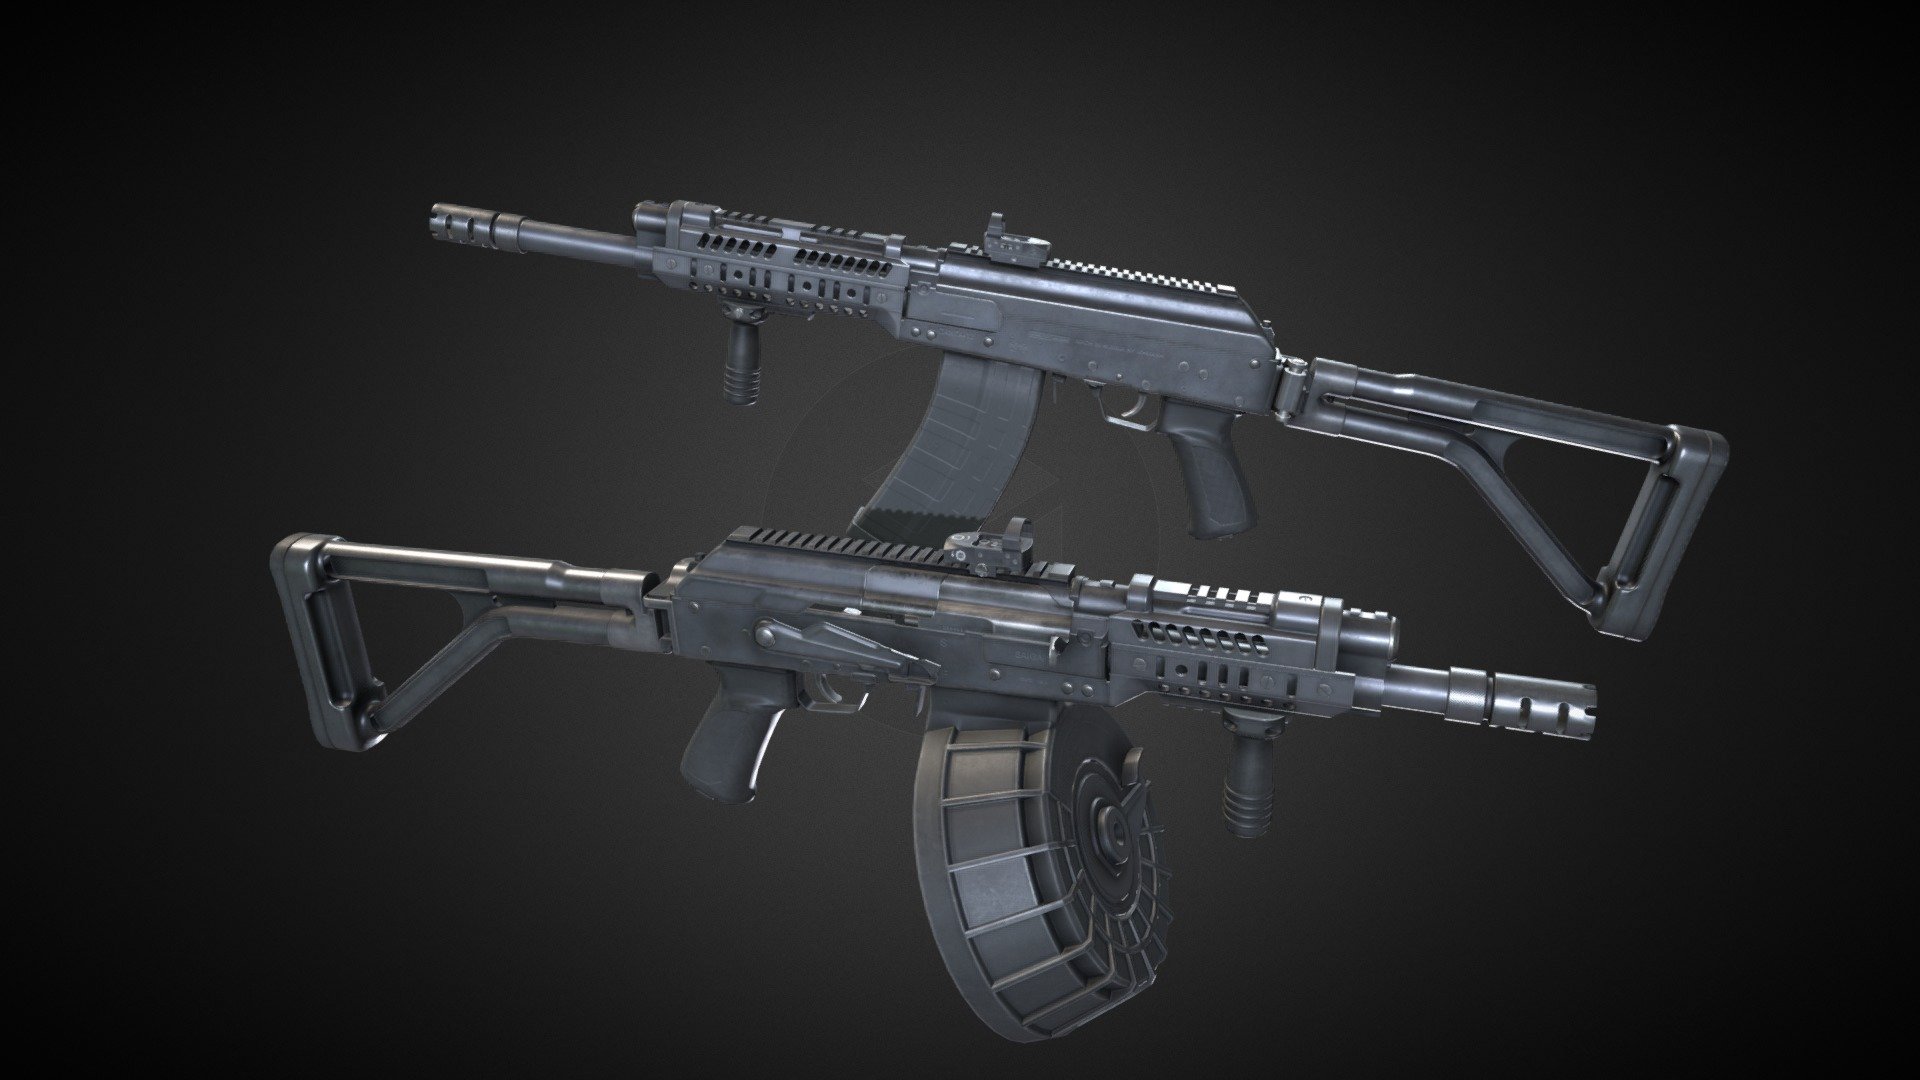 Just a custom Saiga-12 with few additional parts. Nothing fancy, just solid 12 gauge shotgun for close enounters&hellip; or medium if you think your aim is good.  

Model is rigged, but there are also files with all parts separated.

It have 5 main PBR Materials in 4K, plus separate for reddot. Black and FDE colors are included.

Tris: 48K

Verts: 24K  

Made in Blender.  

Note: Model is not made to be 3D printed, do not ask for conversion/scale for it 3d model